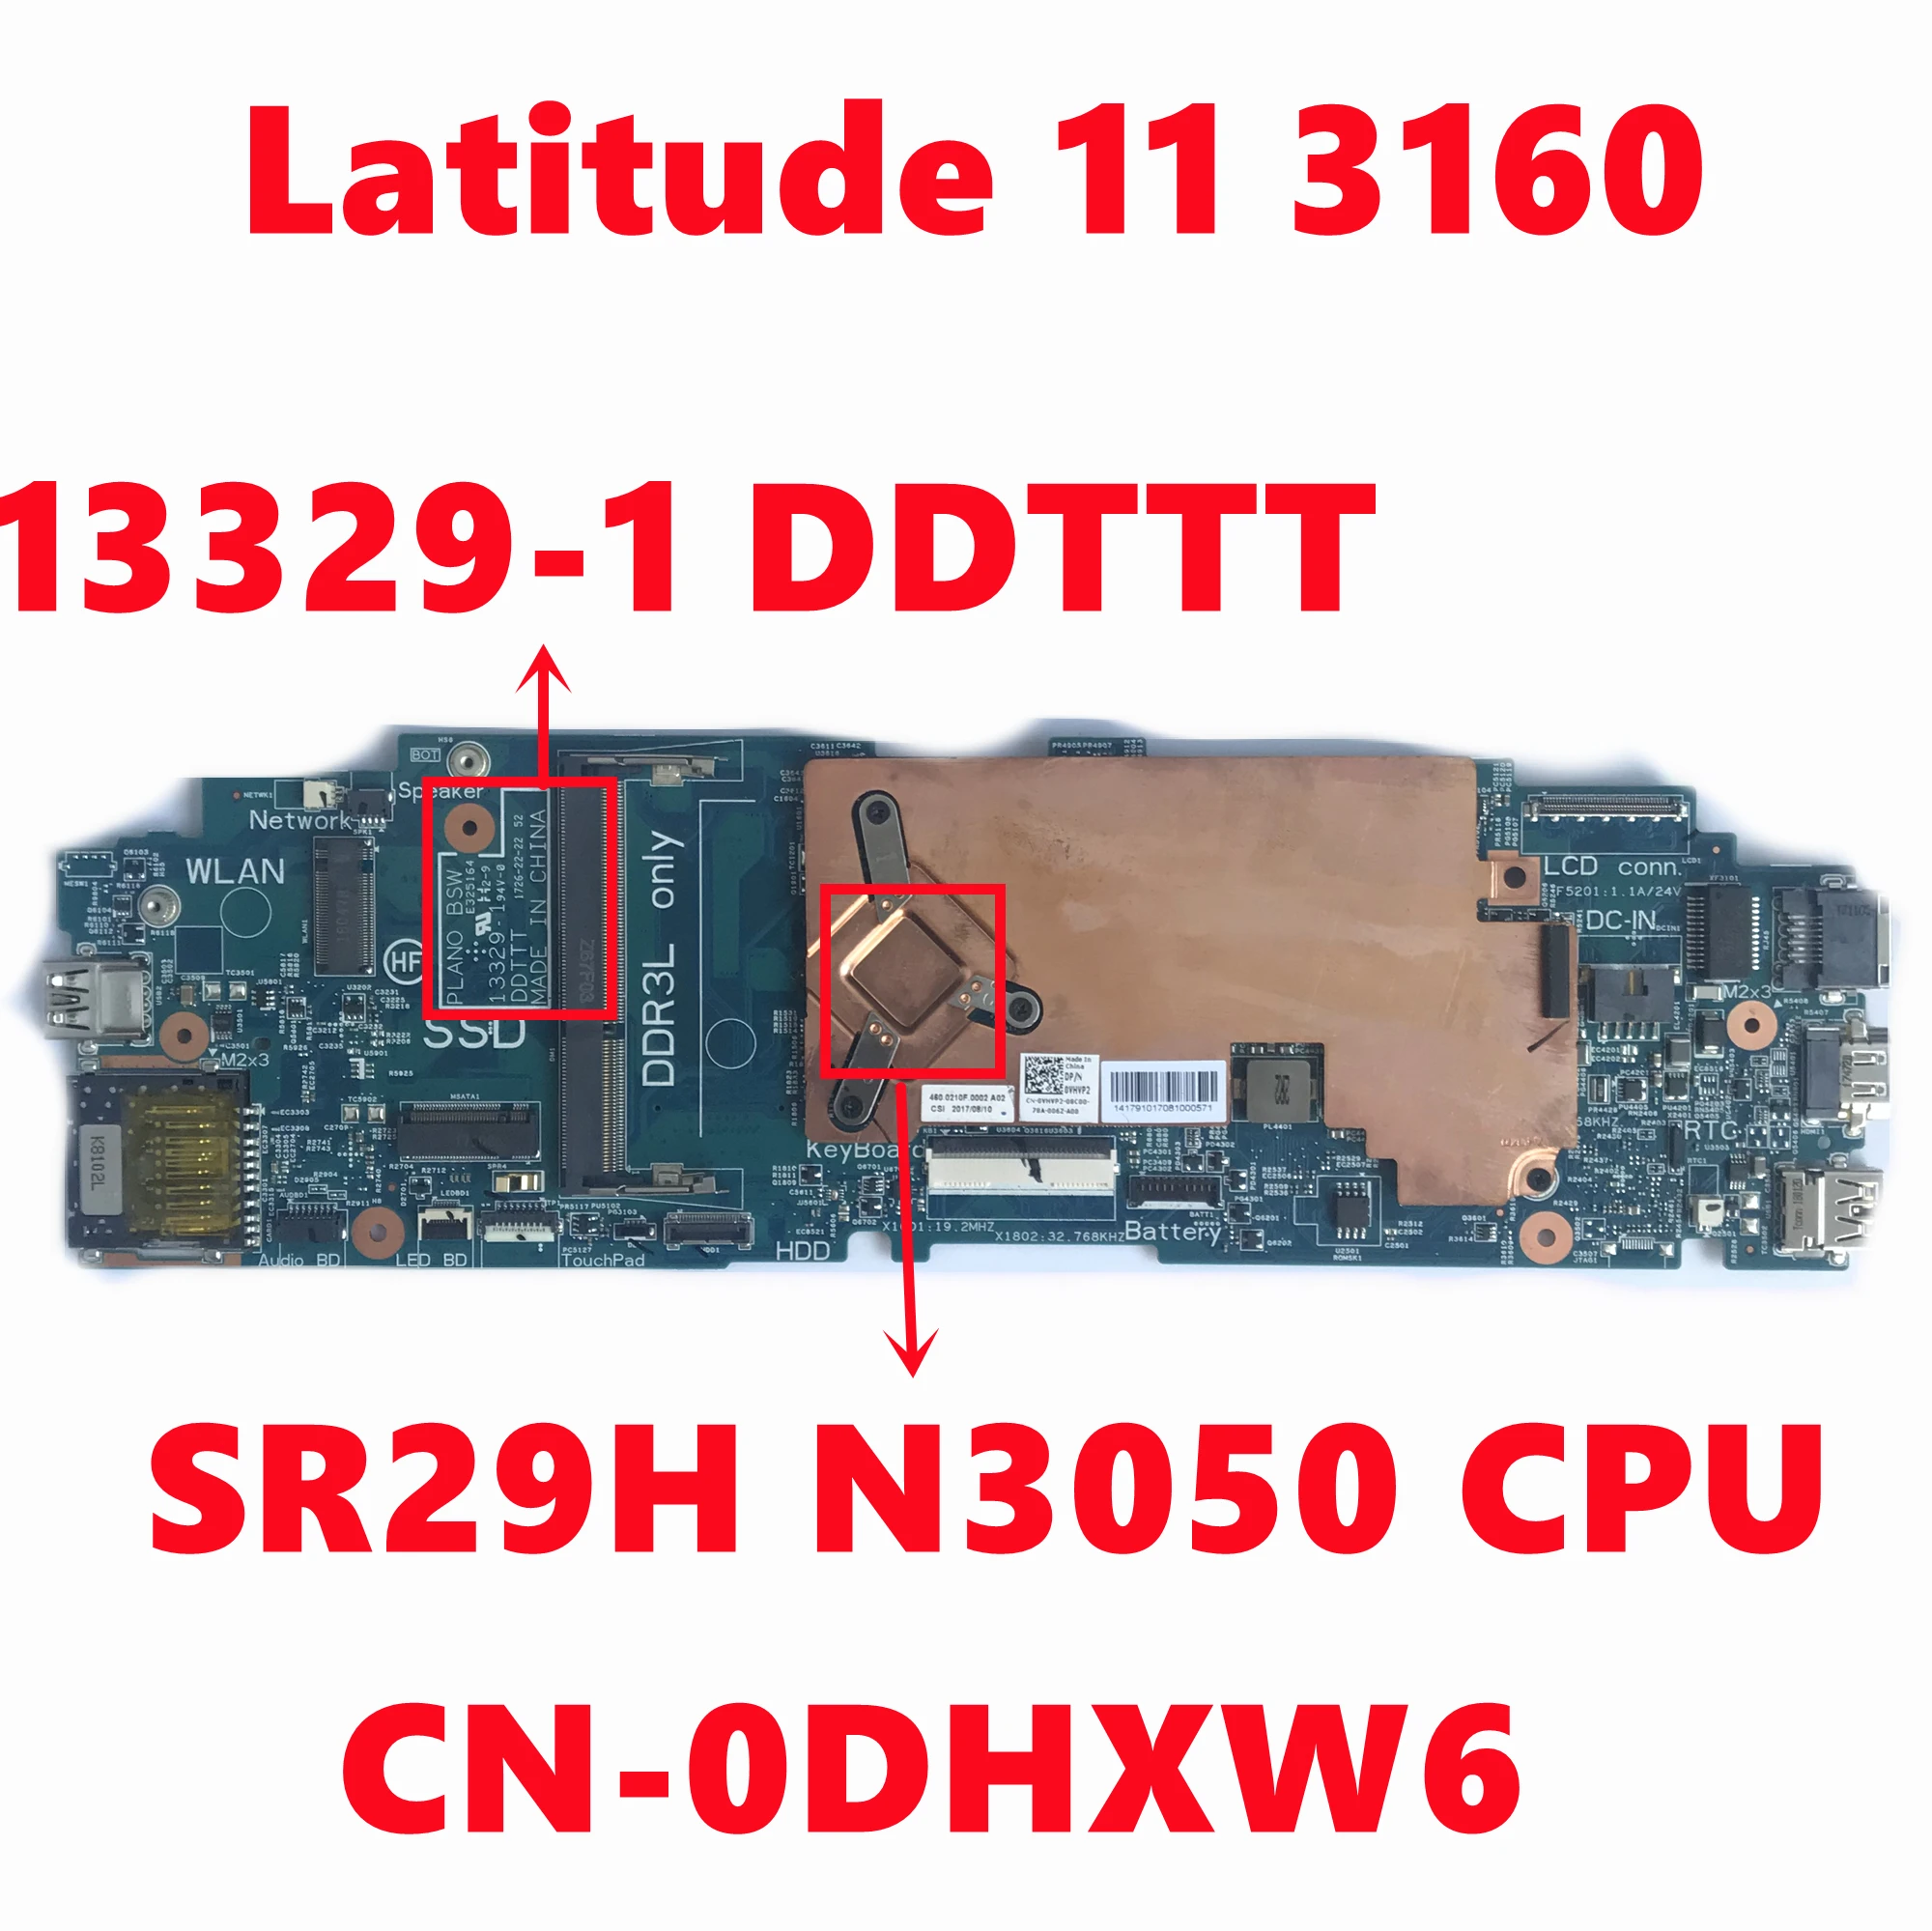 

CN-0DHXW6 0DHXW6 DHXW6 For Dell Latitude 11 3160 Laptop Motherboard 13329-1 DDTTT Mainboard With SR29H N3050 CPU Fully Tested OK